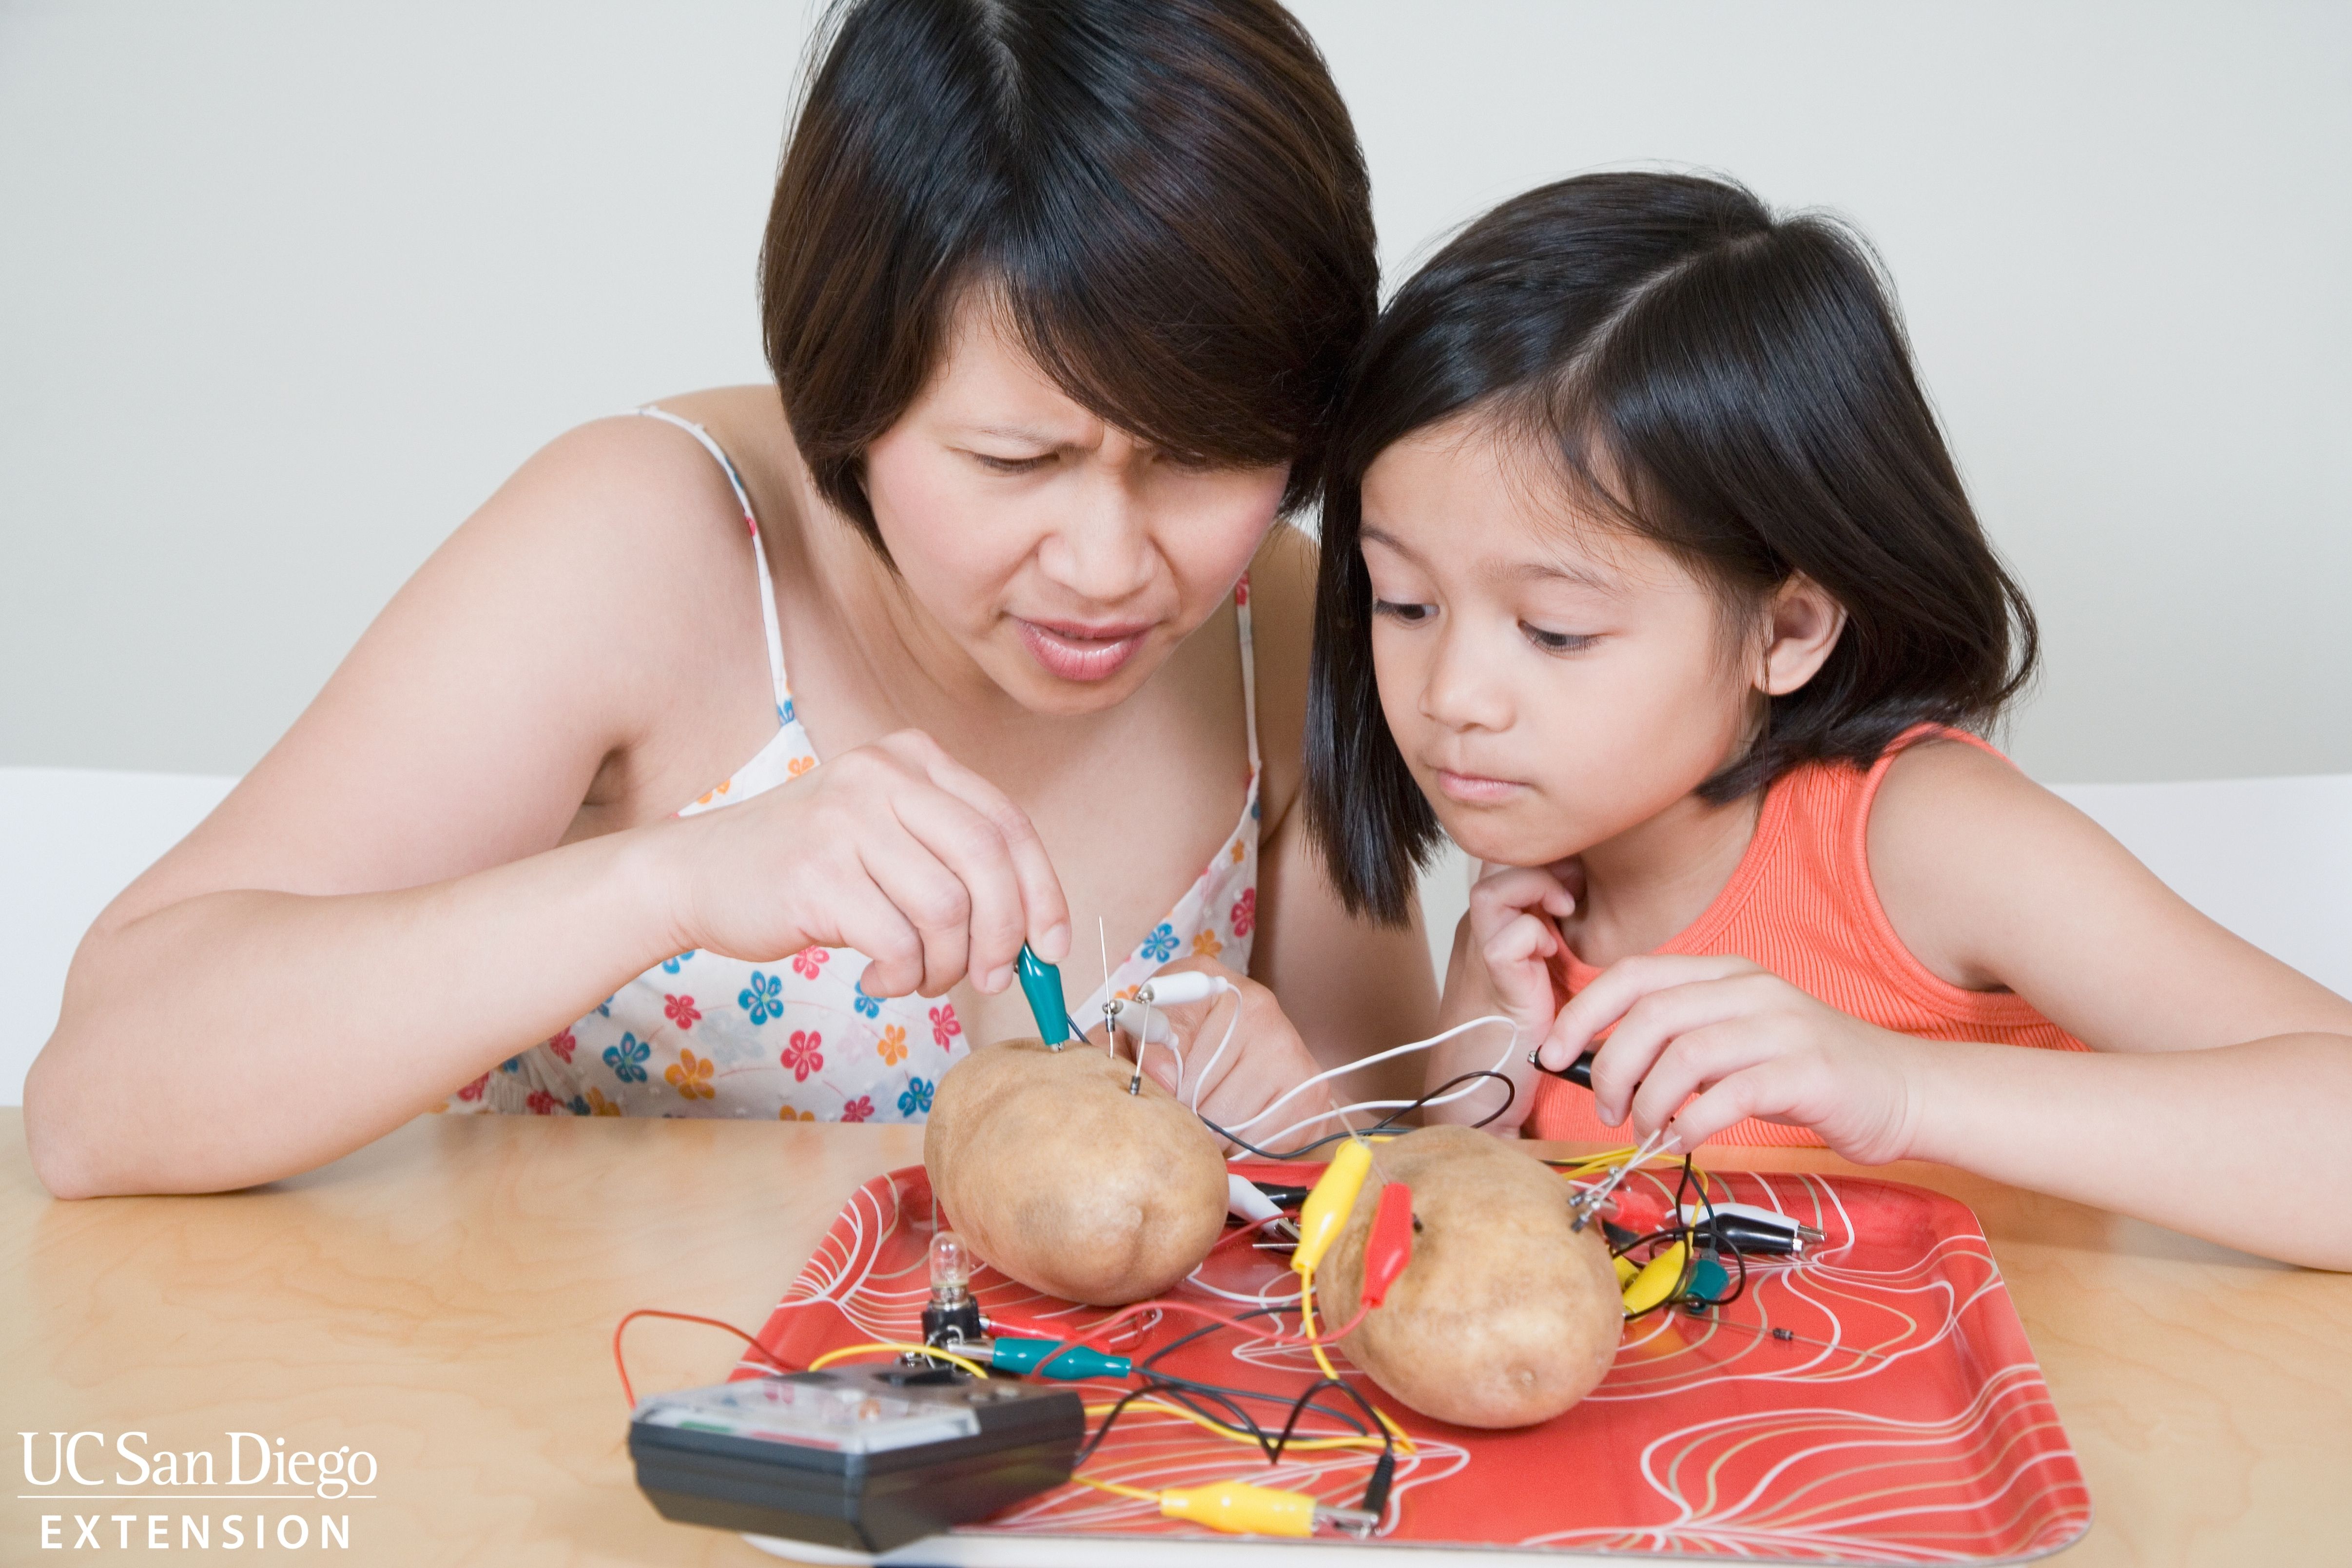 mother and daughter working with vegetables and wires